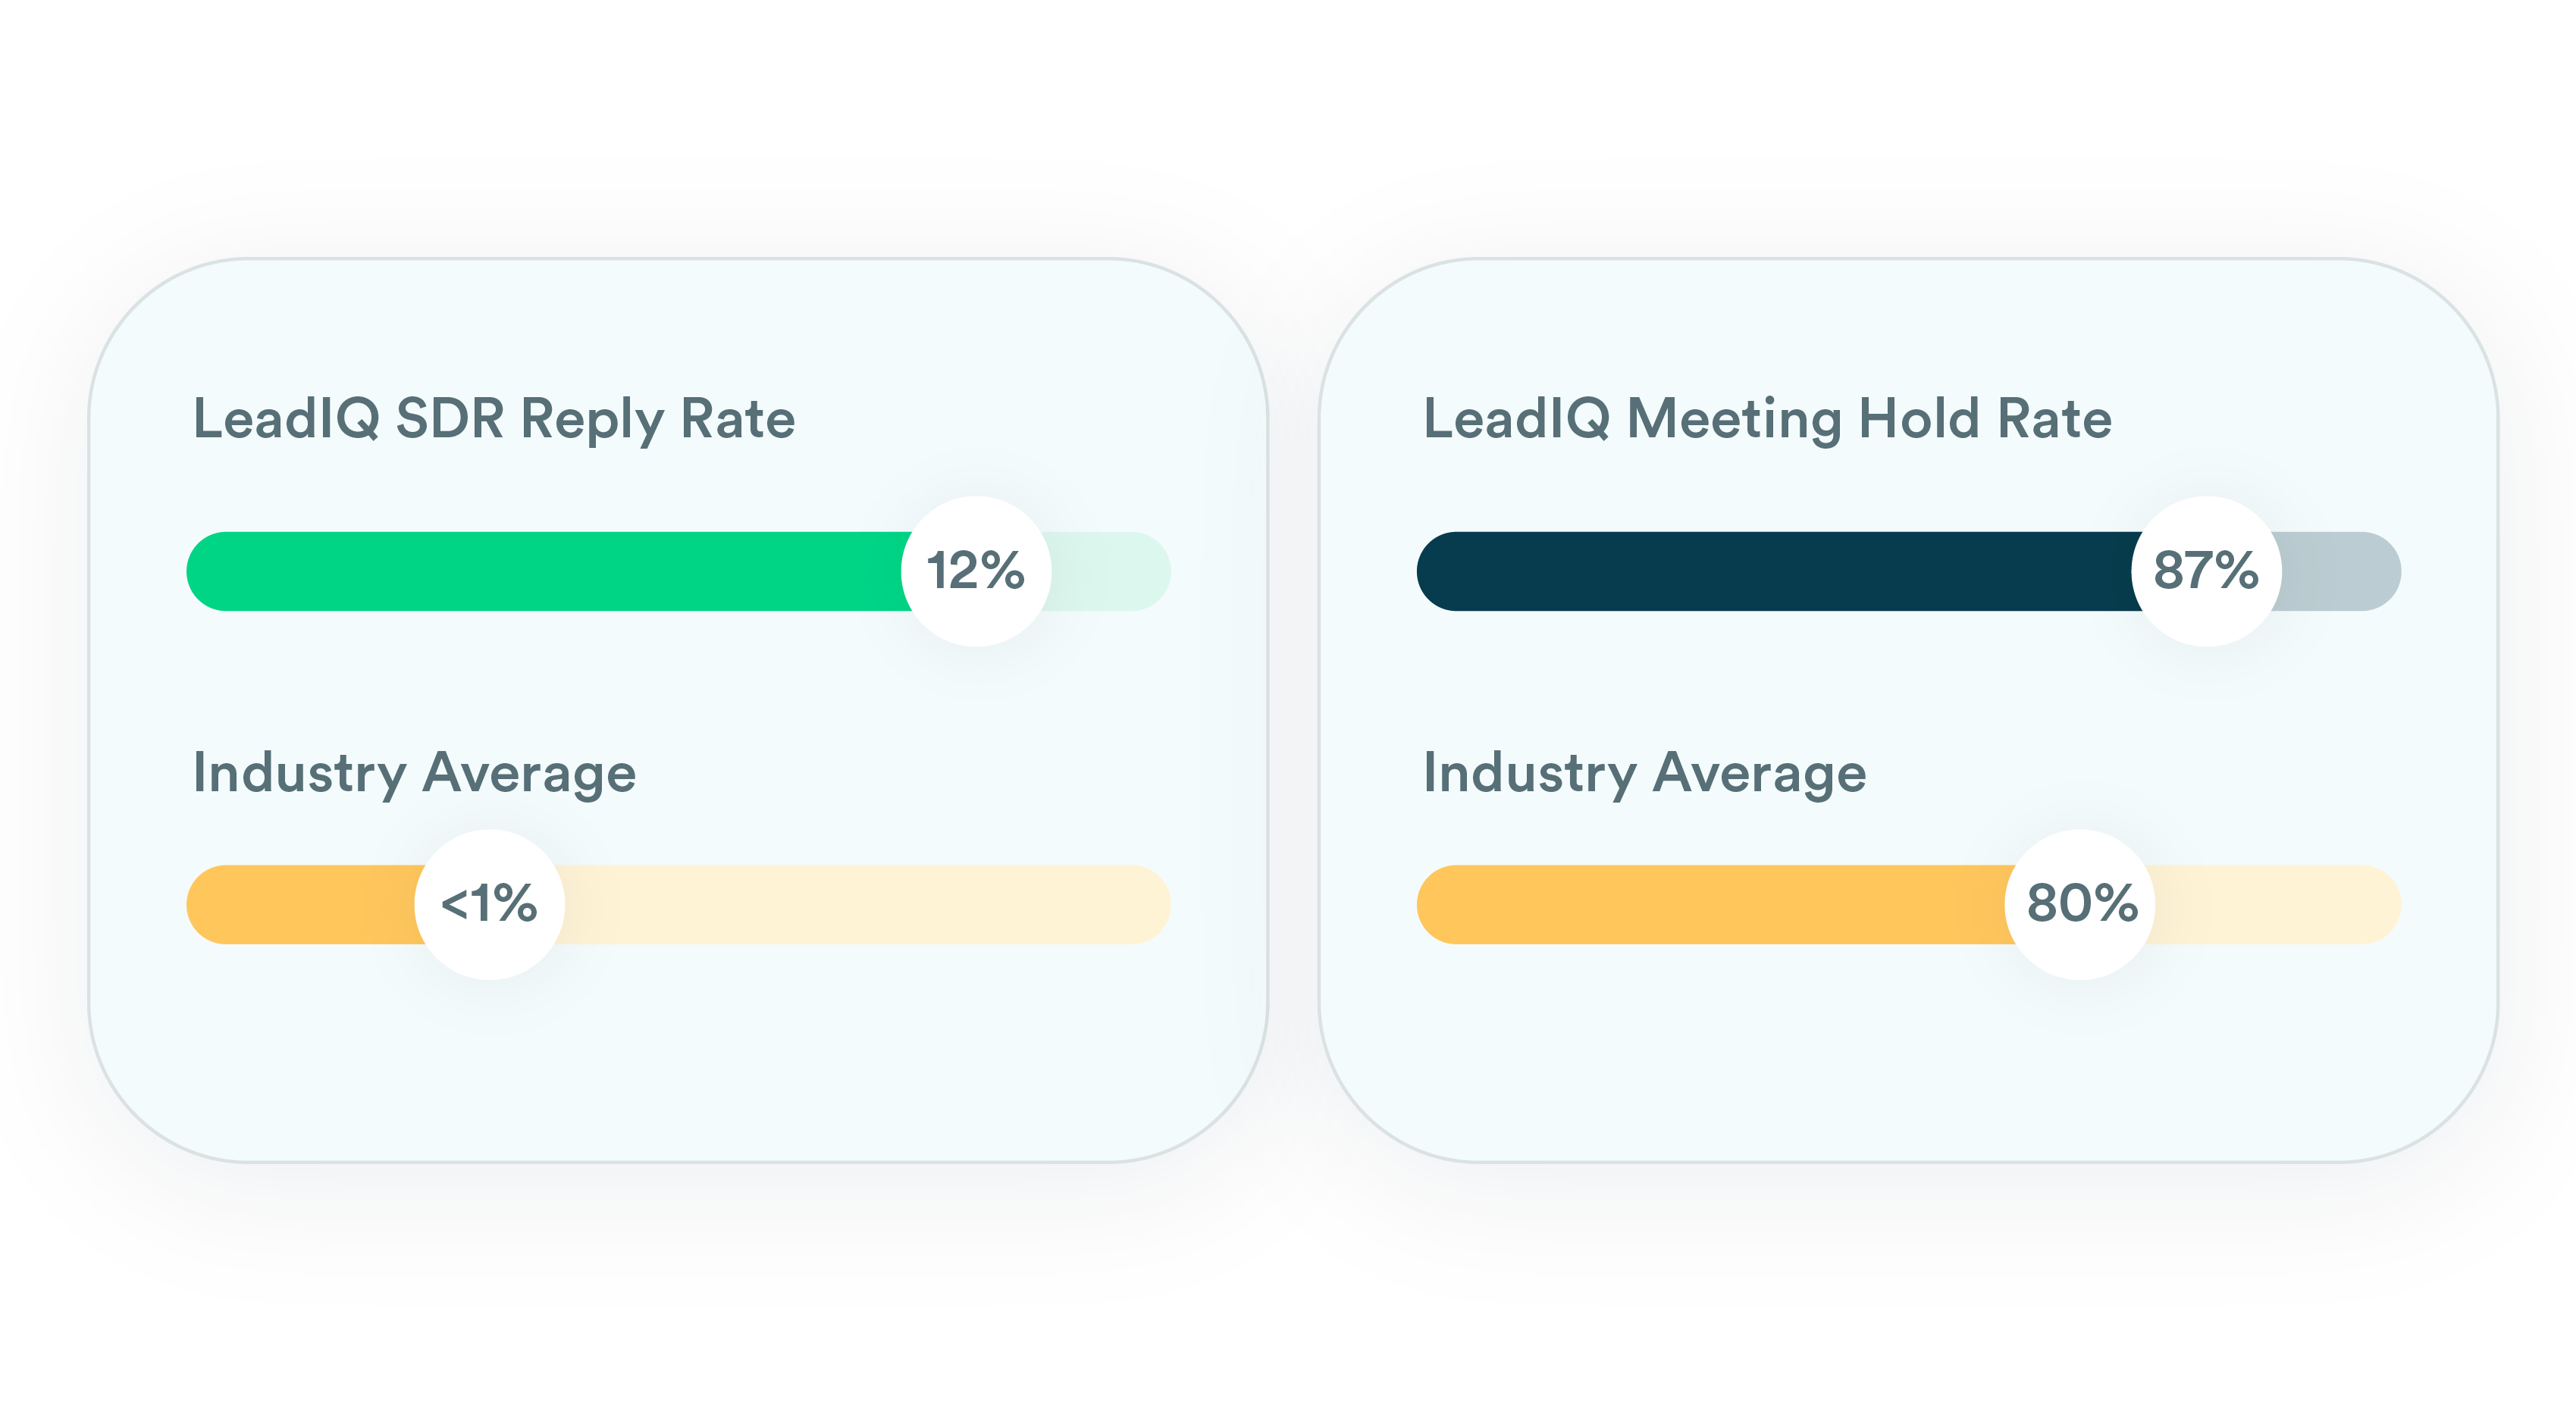 Graphical Chart: LeadIQ SDR Reply Rate = 12% vs Industry Standard of <1% and LeadIQ Meeting Hold Rate of 87% vs Industry Average of 80%